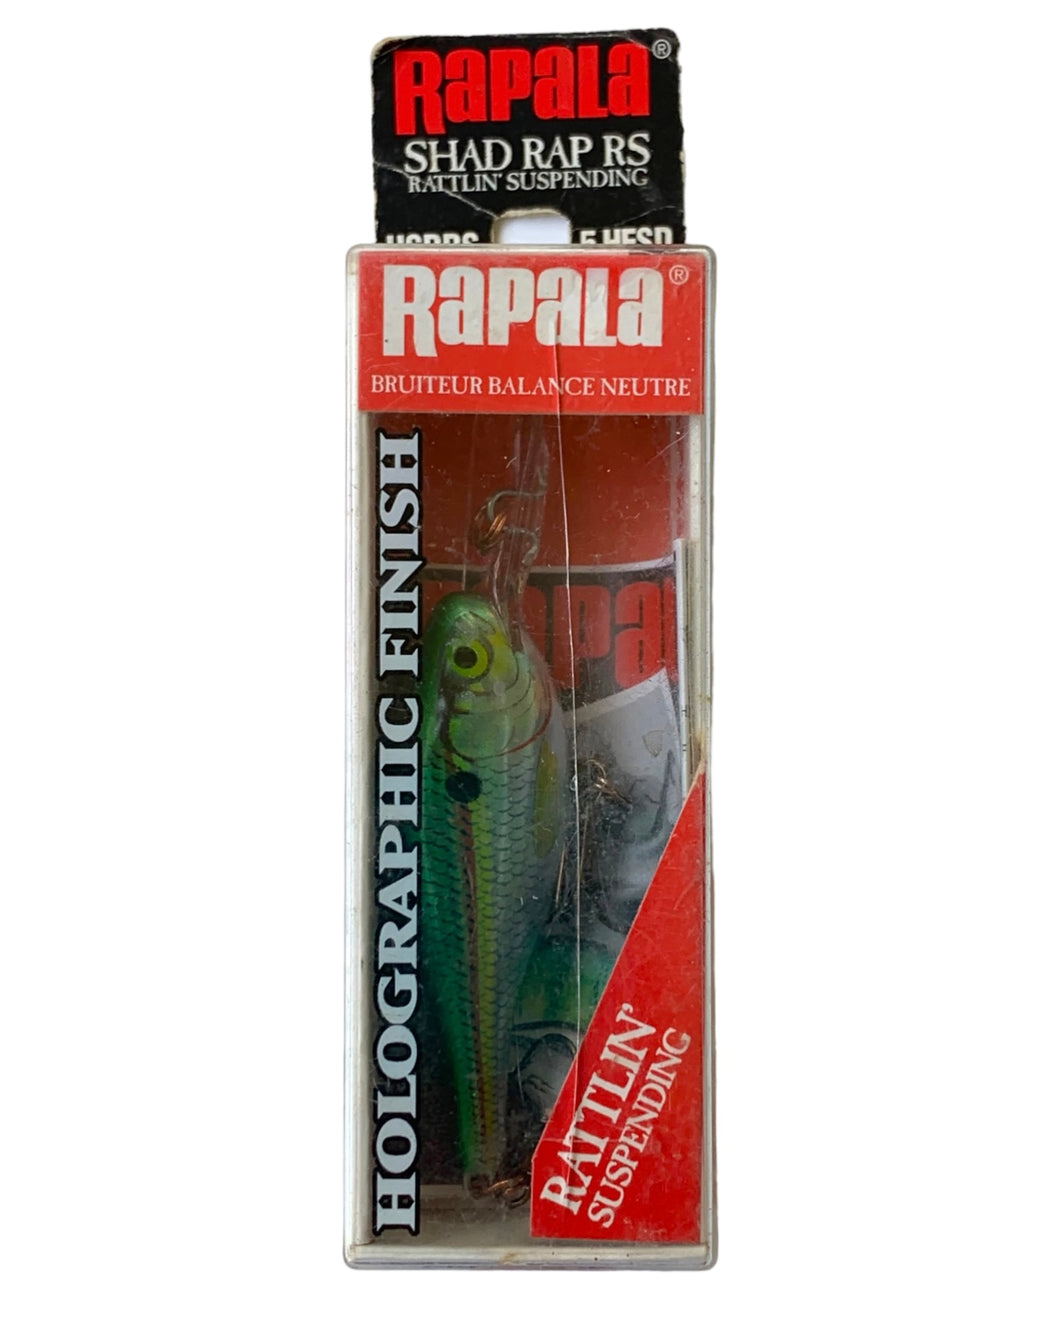 HOLOGRAPHIC FINISH • RAPALA SHAD RAP RS RATTLIN SUSPENDING Fishing Lure • HSRRS-5 HESD HOLOGRAPHIC EMERALD SHAD